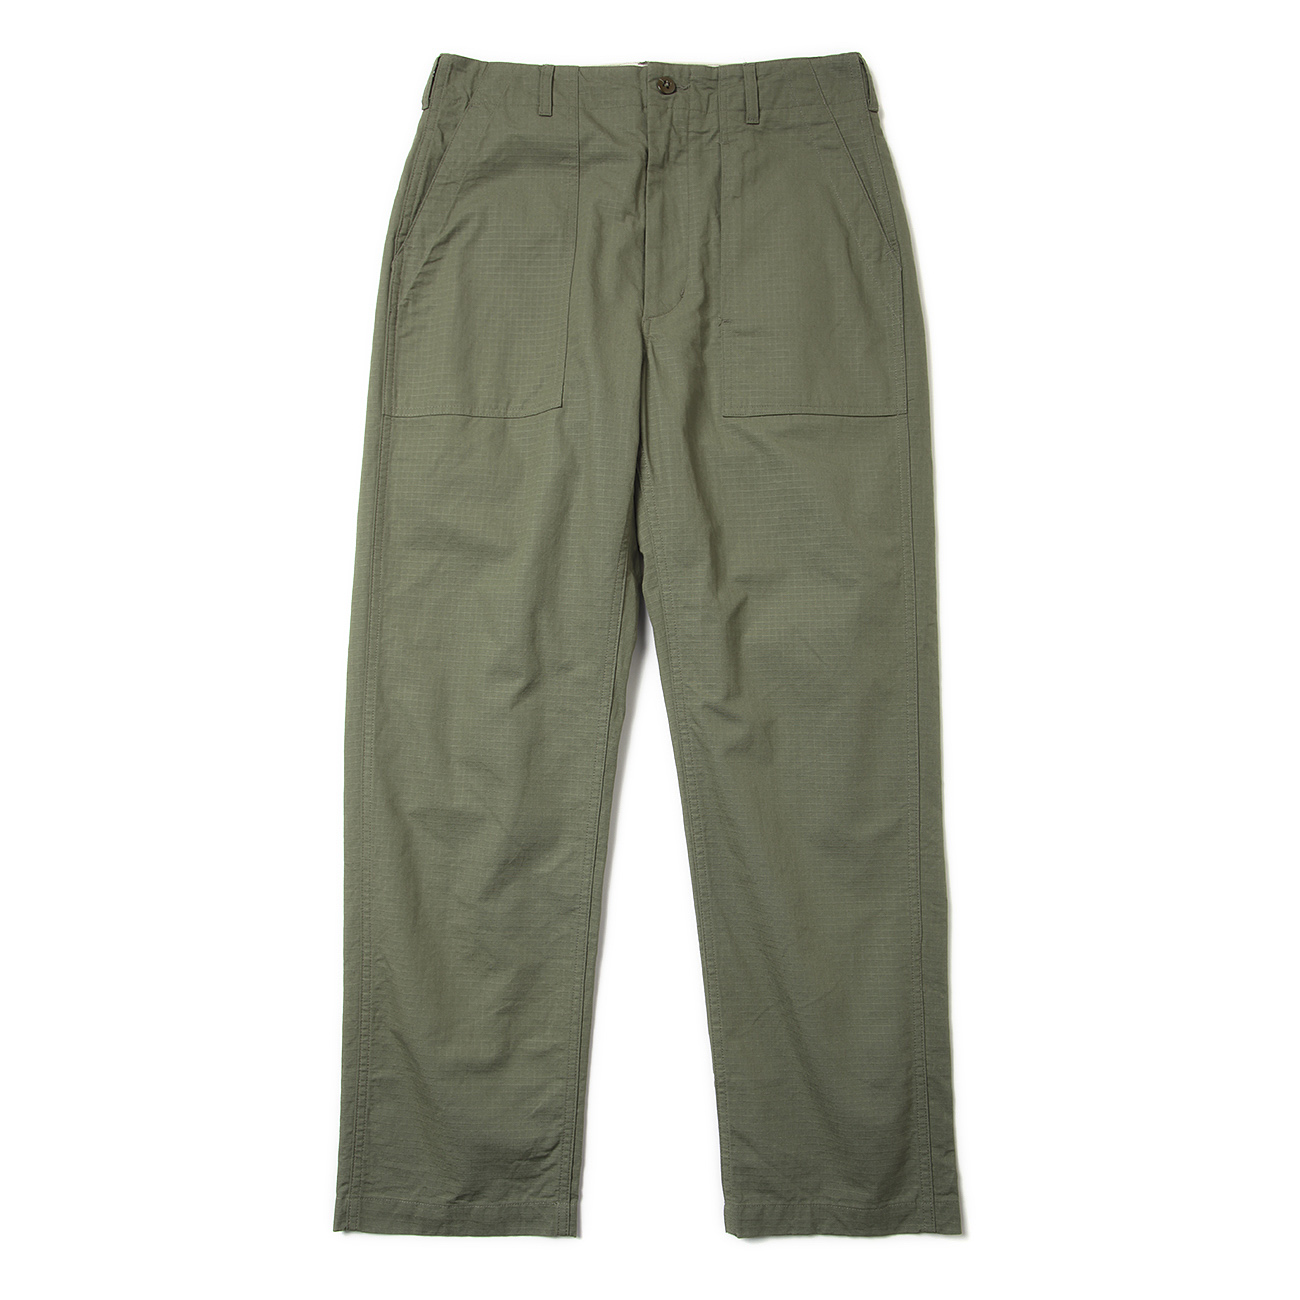 ENGINEERED GARMENTS エンジニアドガーメンツ Fatigue Pant Cotton Ripstop Olive  通販 正規取扱店 COLLECT STORE コレクトストア